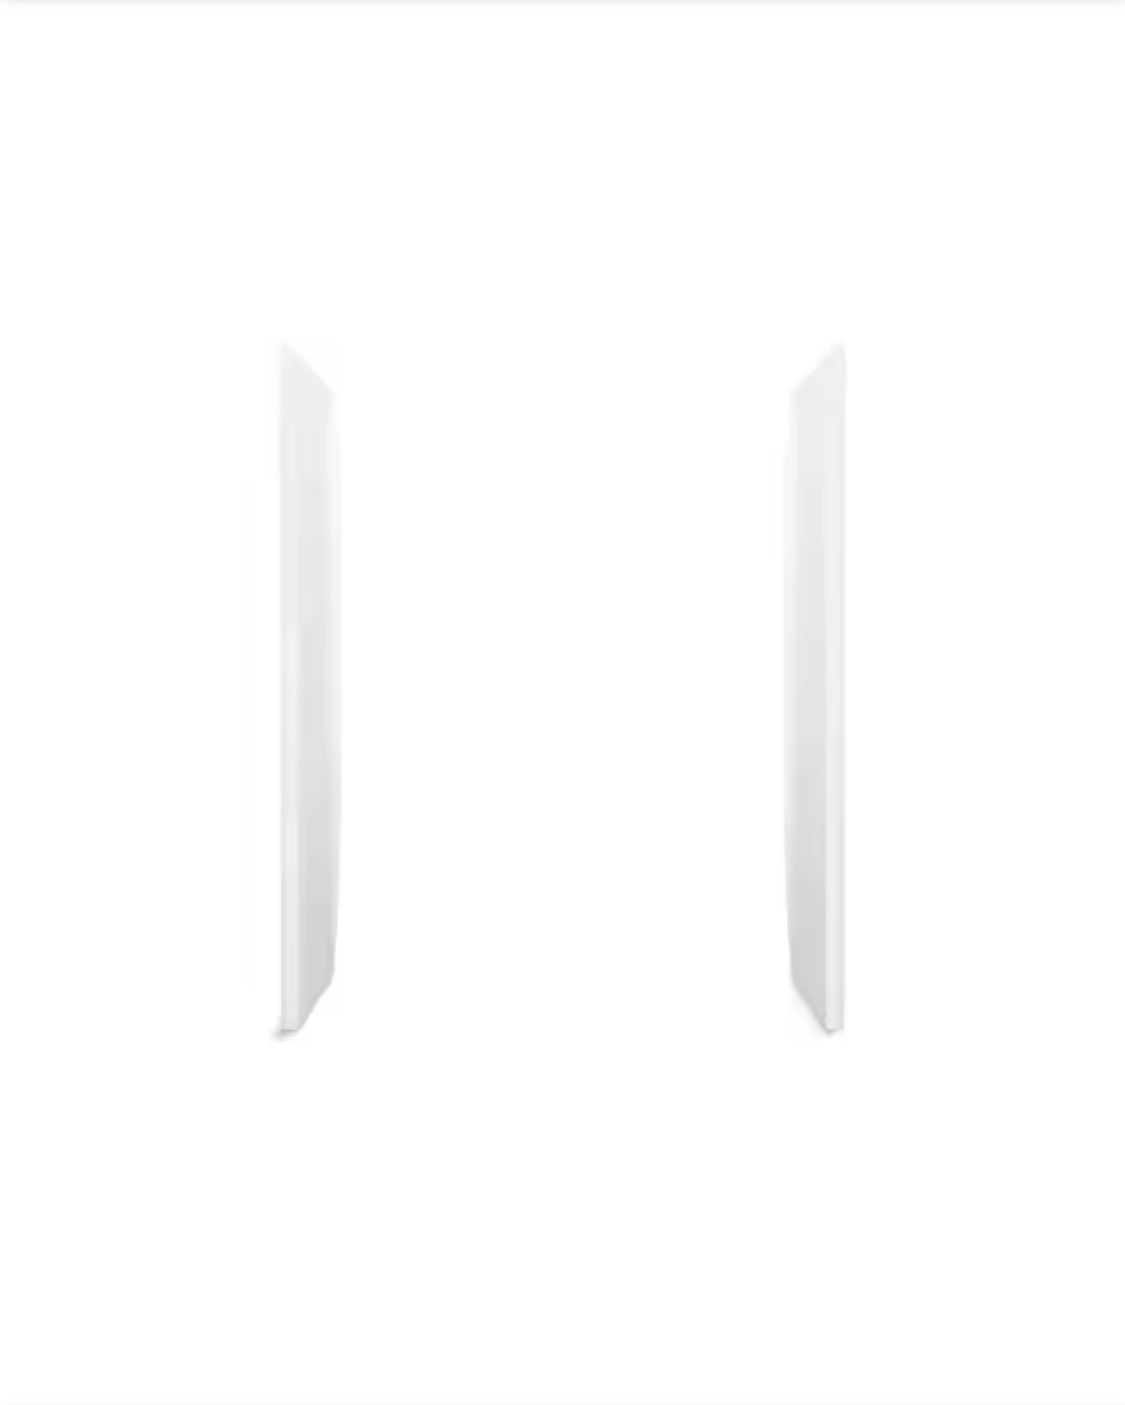 STORE+ 30 in. W x 75.875 in. H Five-Piece Direct-to-Stud Shower Wall Surround Alcove in White